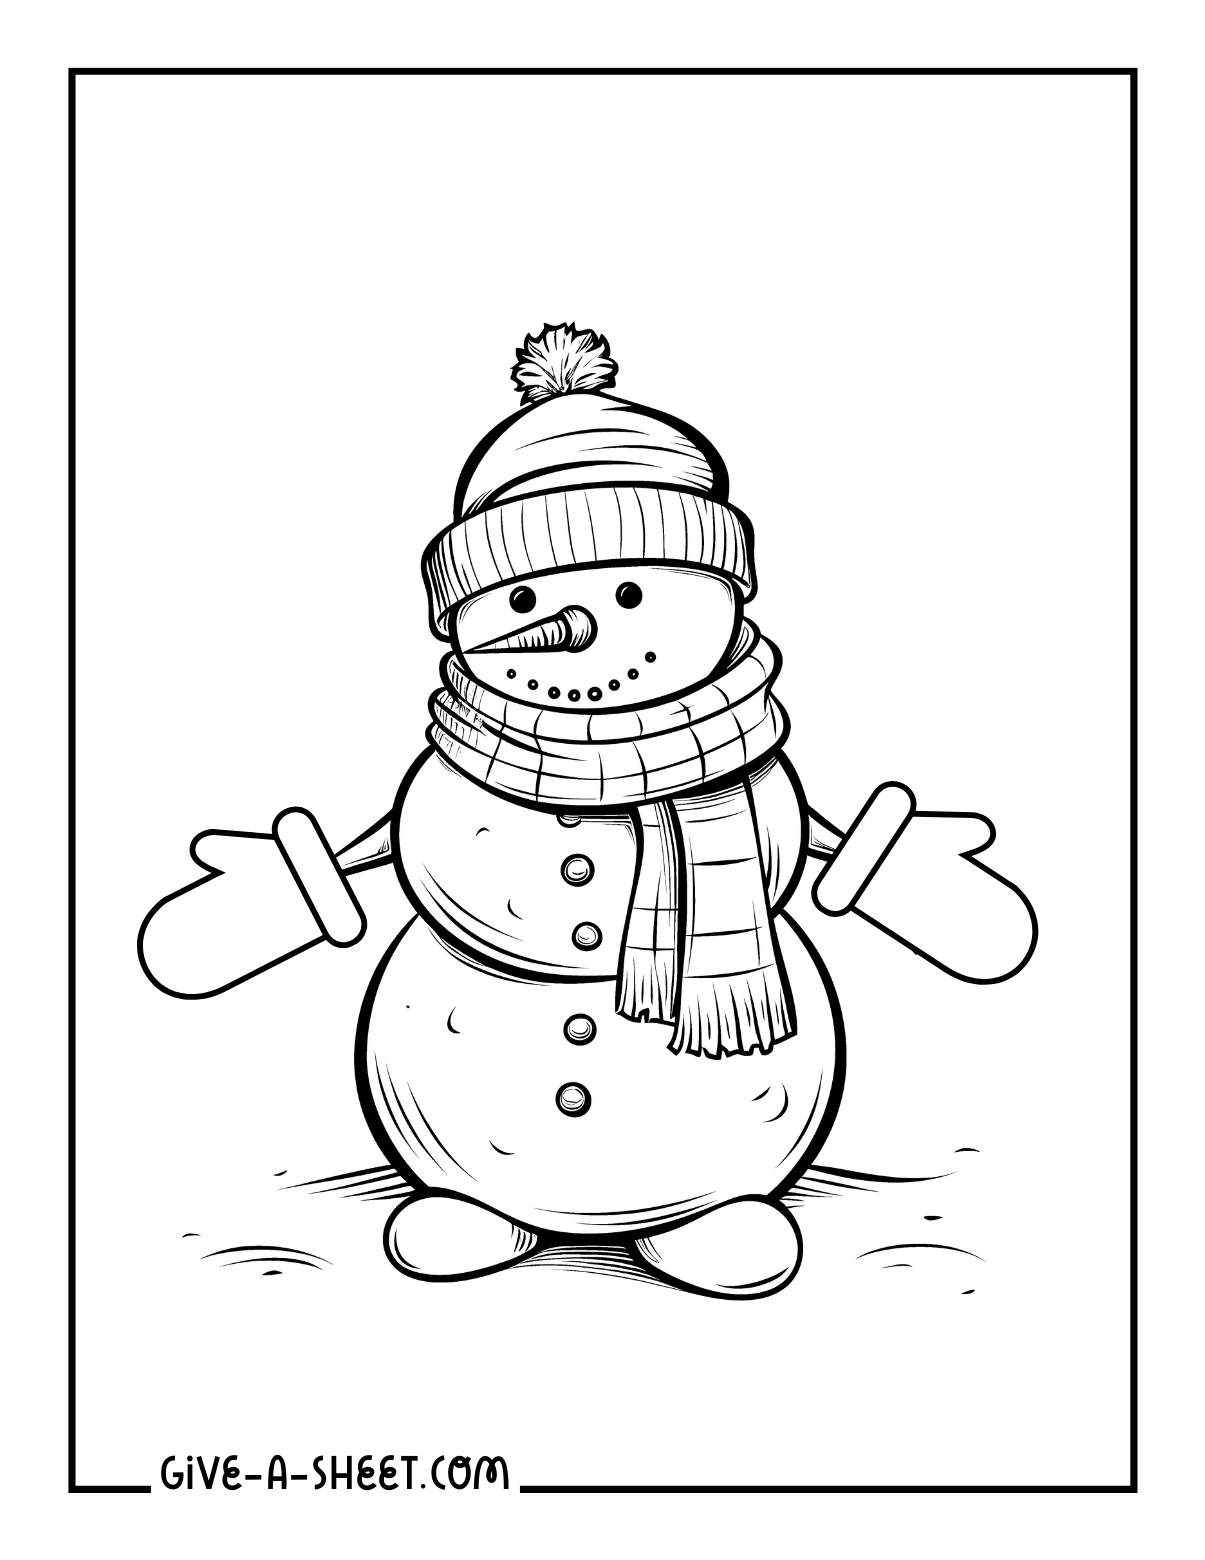 Snowman wearing winter accessory coloring page for kids.